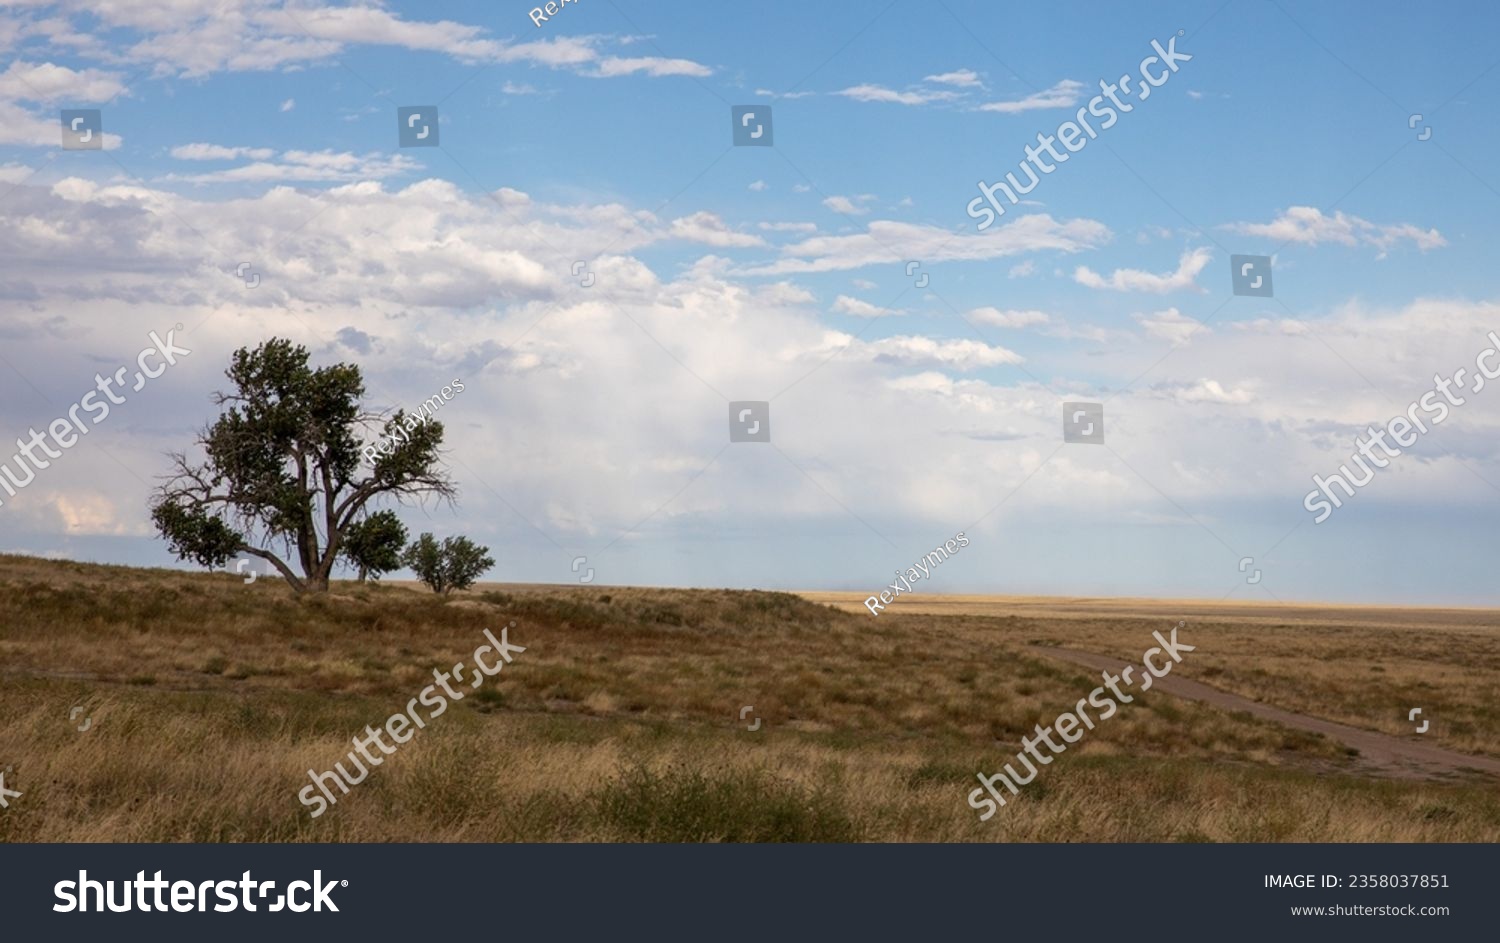 The grassy plains of eastern Colorado. Blue sky, dark storm clouds and yellow grasses in the foreground with two stark trees on the horizon.  Tall grasses on the high plains.   #2358037851